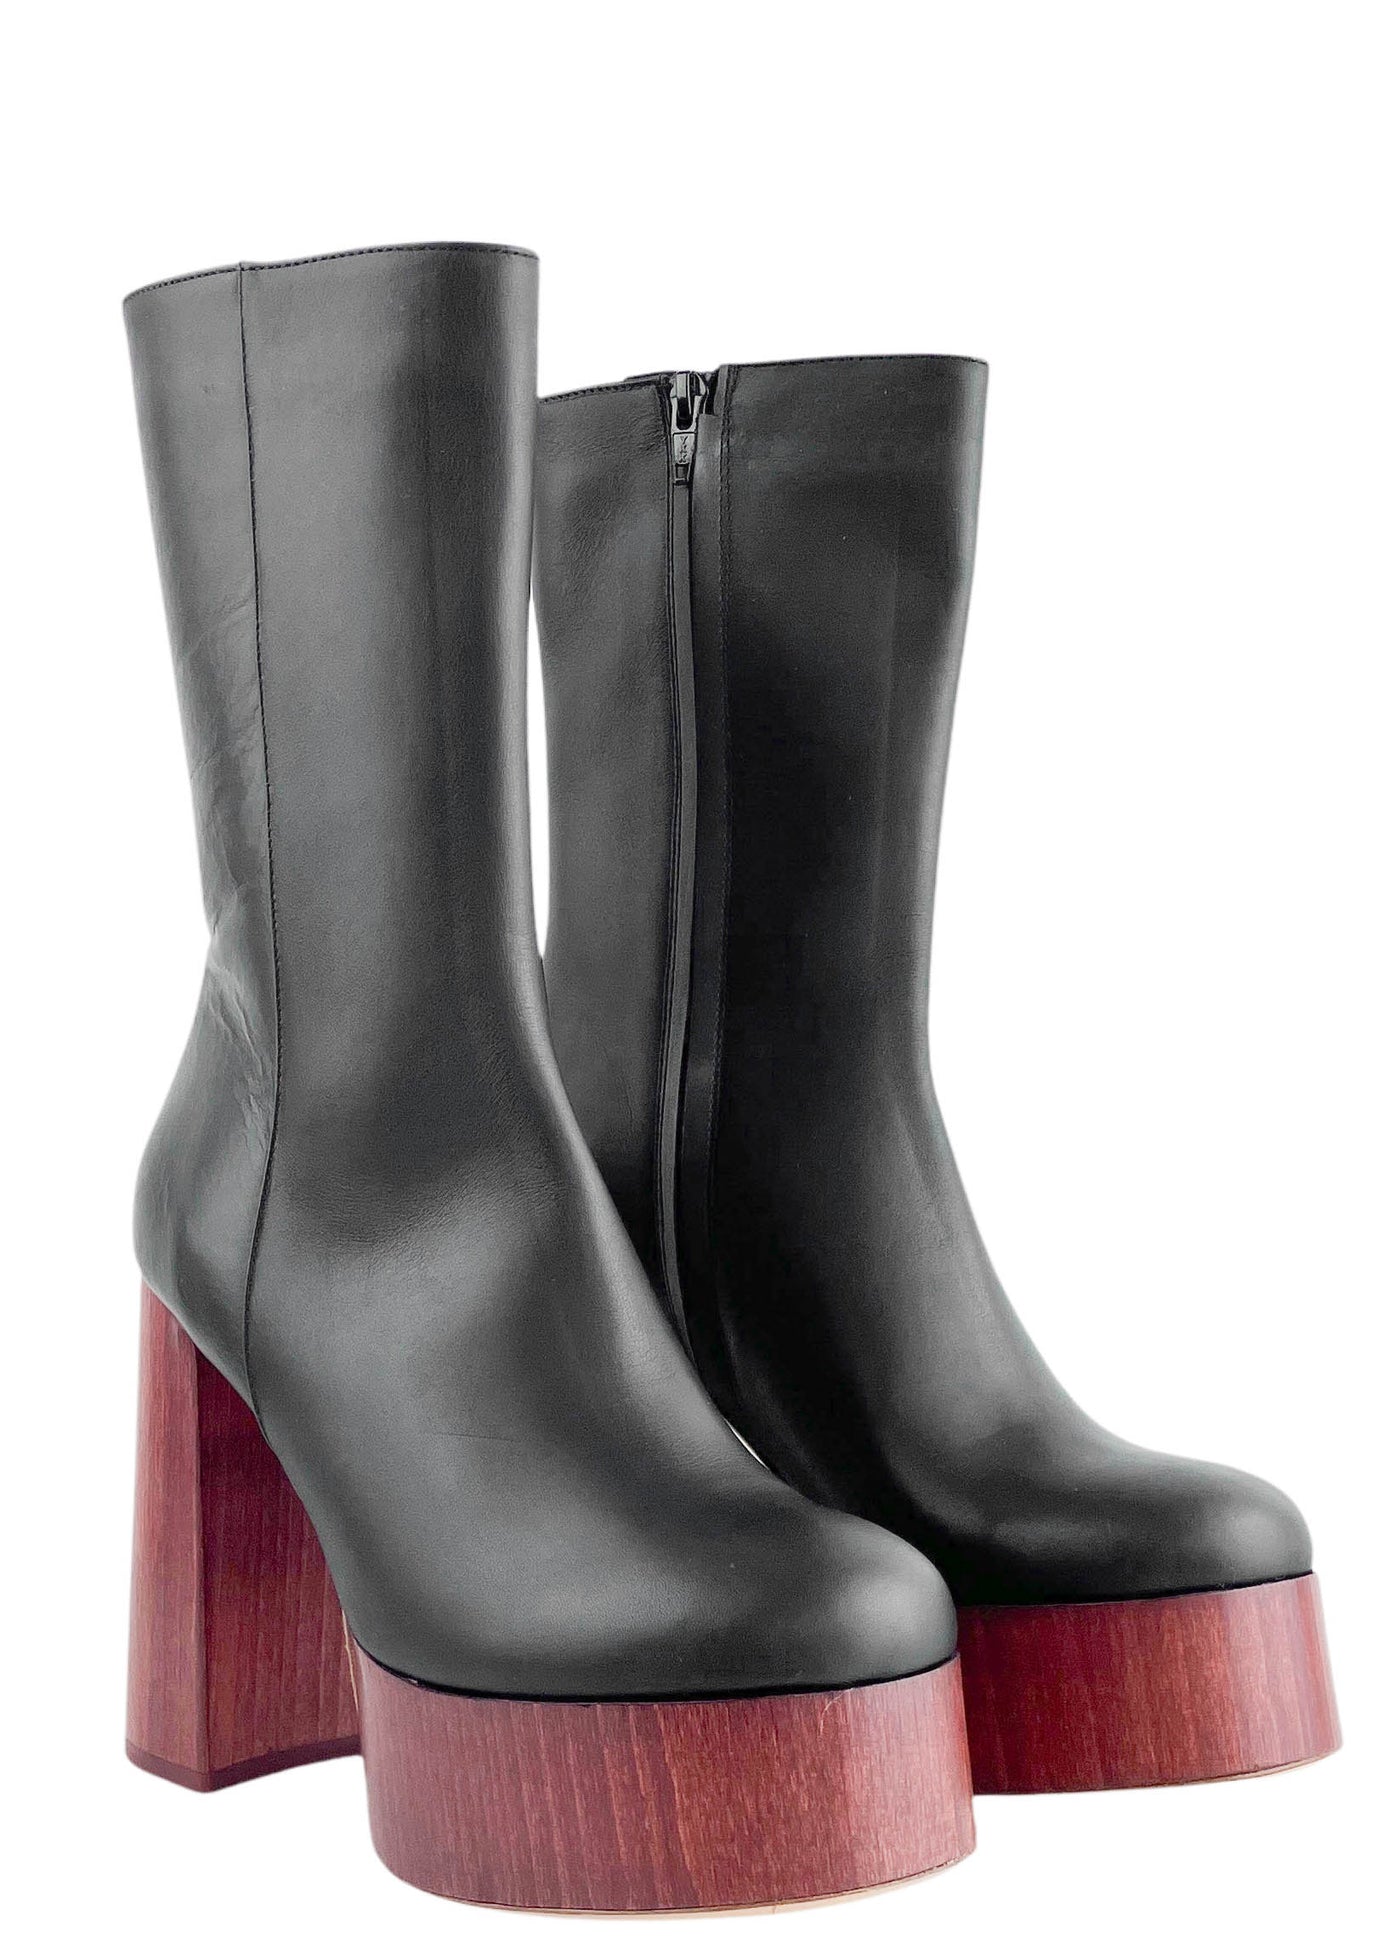 GIA/RHW Rosie Platform Calf Boots in Black and Brown - Discounts on GIA/RHW at UAL